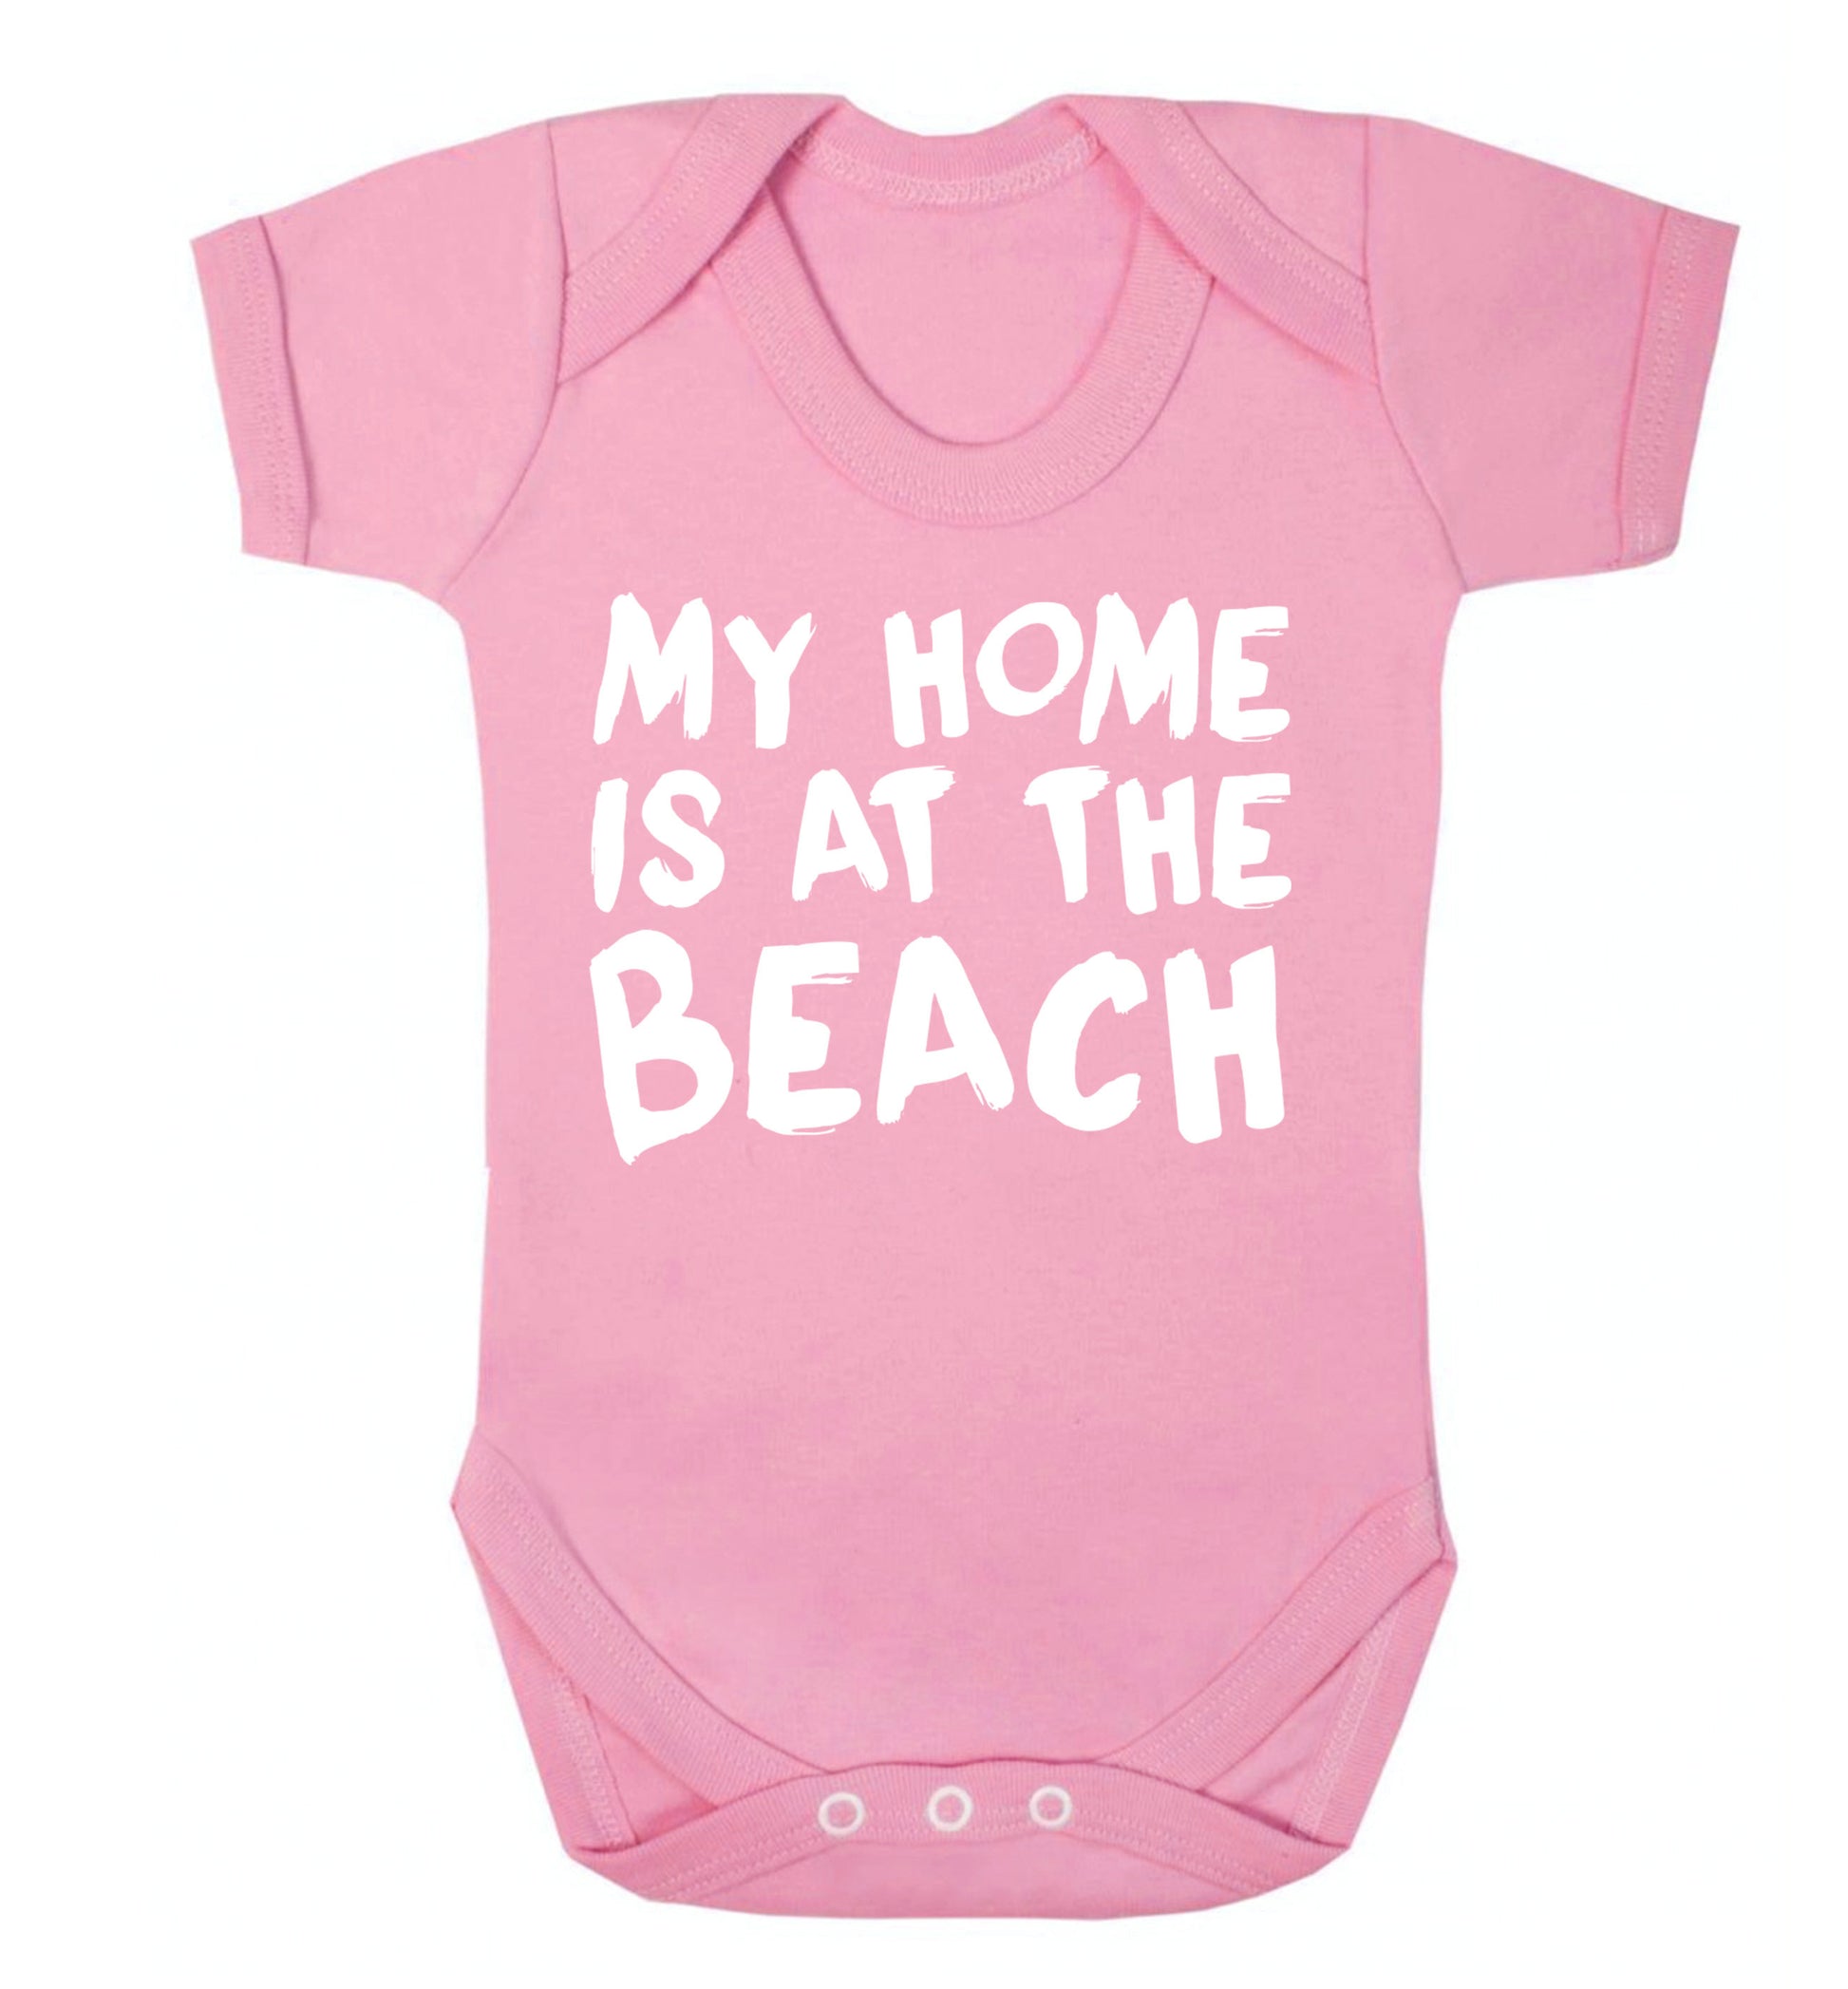 My home is at the beach Baby Vest pale pink 18-24 months